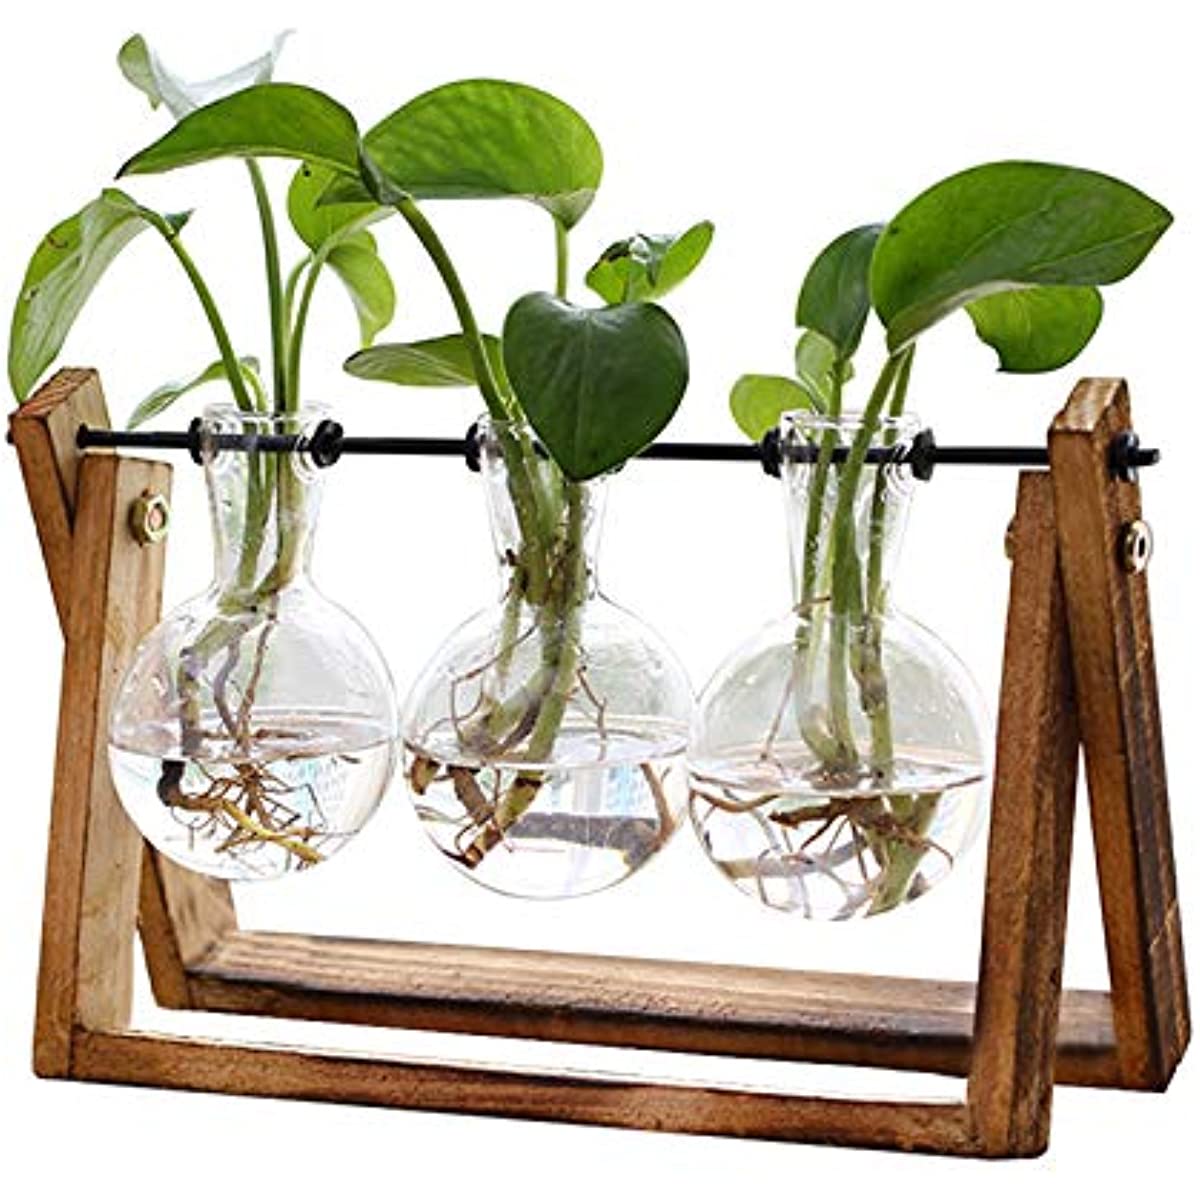 1pc Plant Terrarium With Wooden Stand, Air Planter Bulb Glass Vase Metal  Swivel Holder Retro Tabletop For Hydroponics Home Garden Office Decoration 